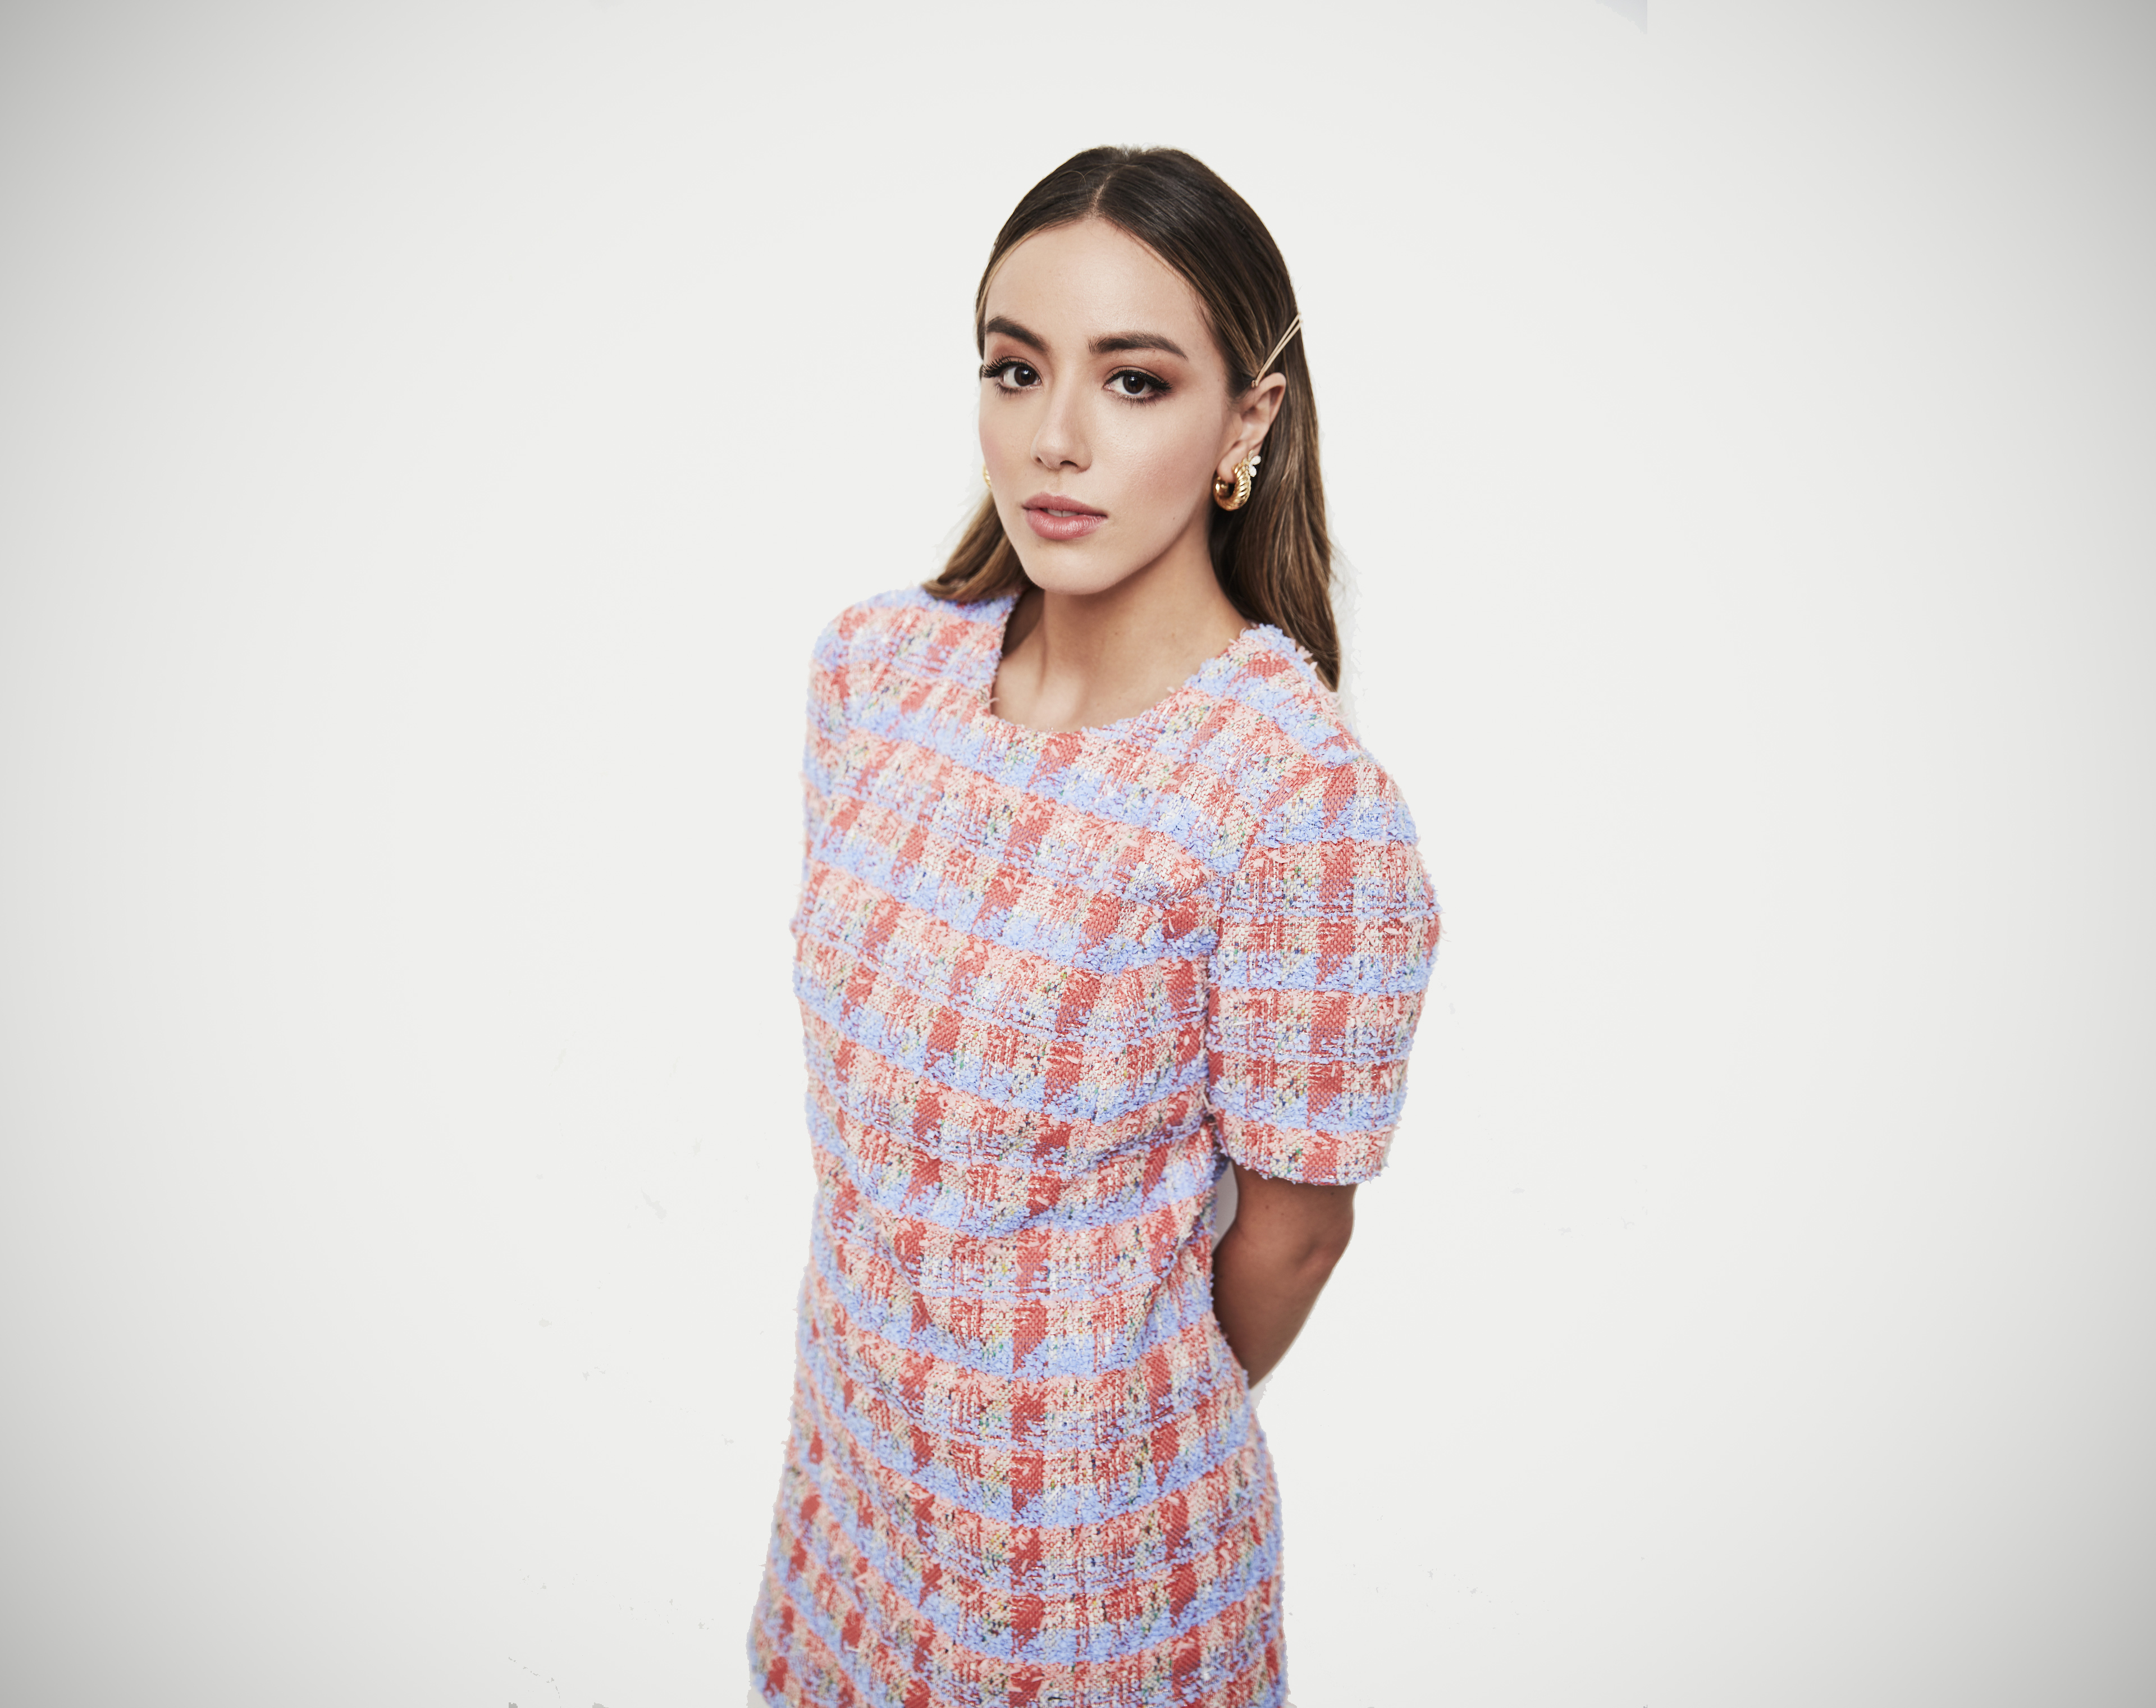 Chloe Bennet Picture